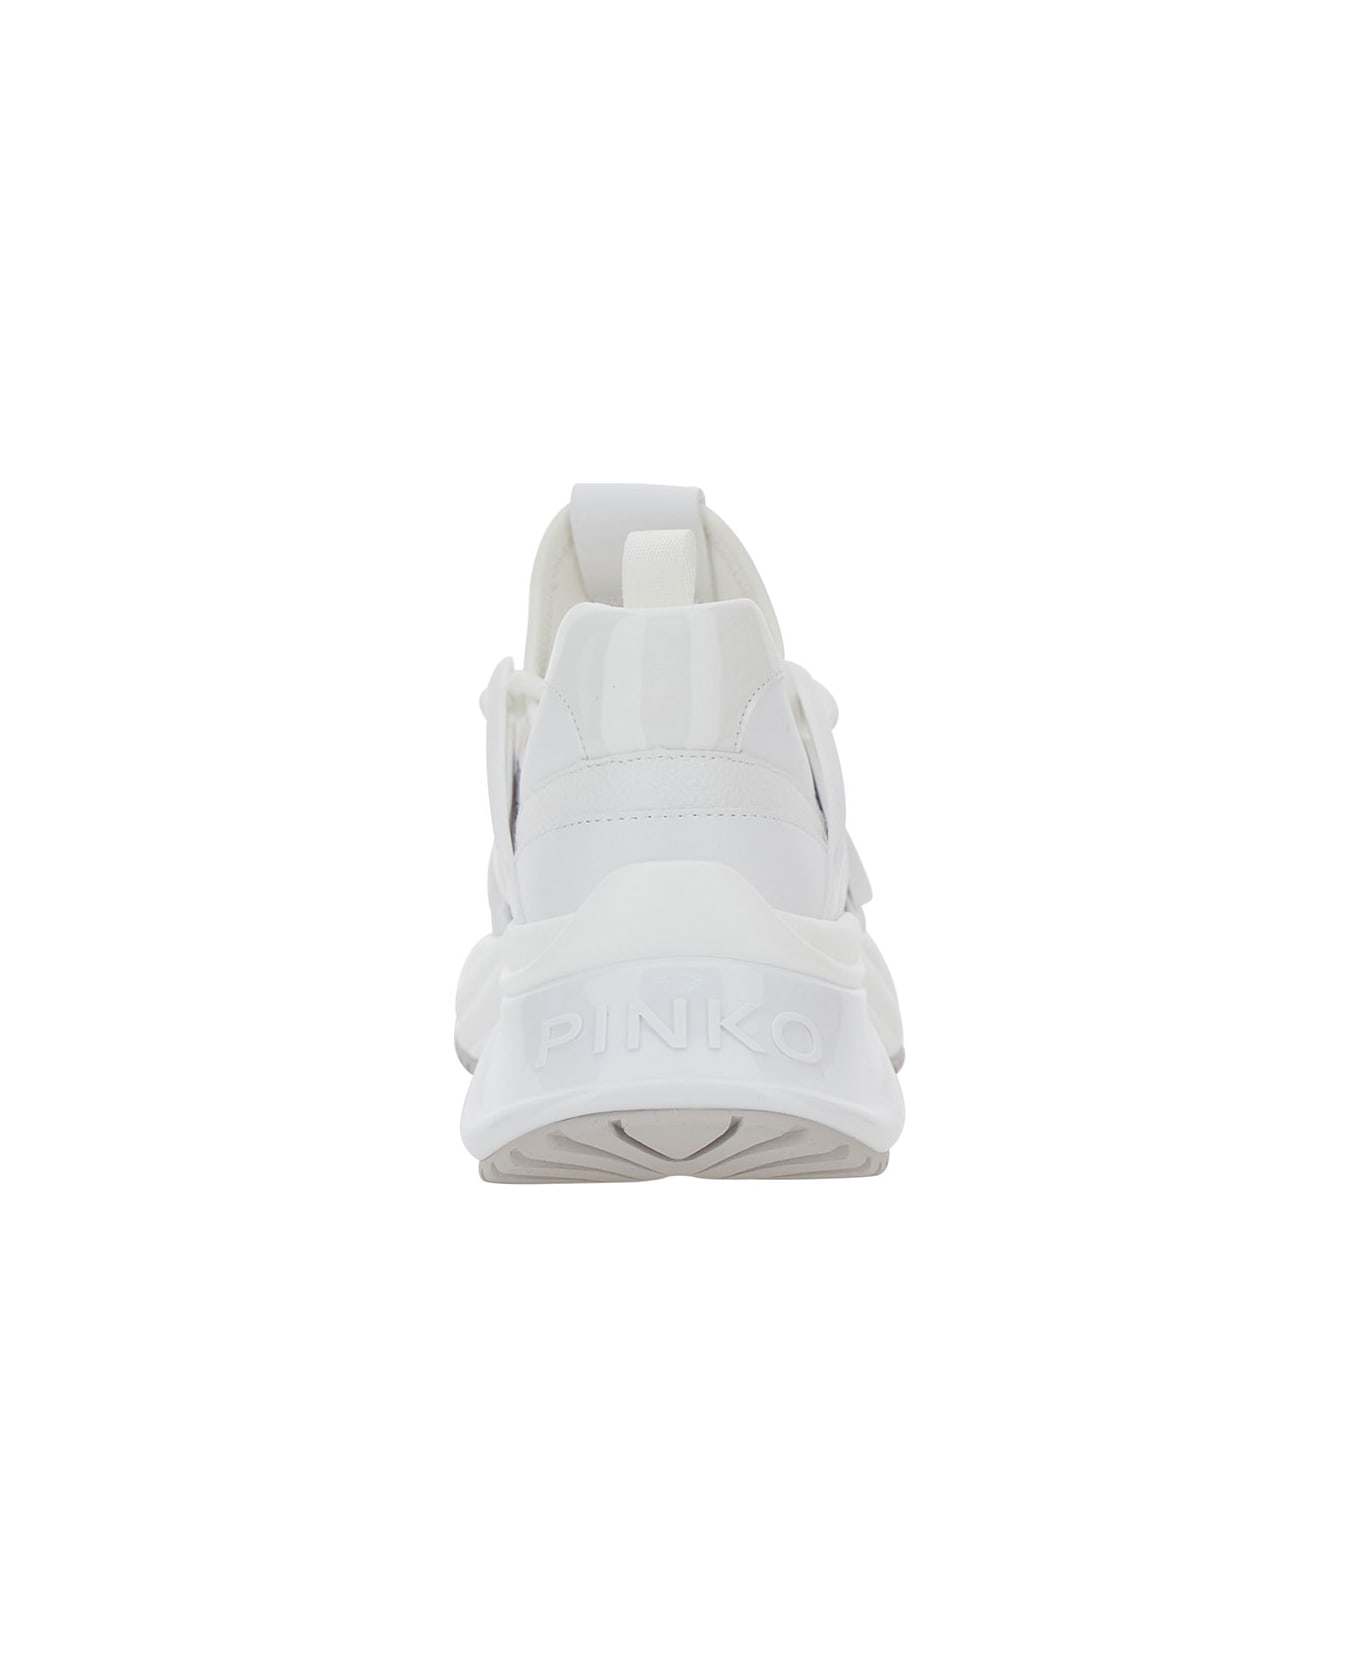 Pinko Ariel Sneakers - WHITE CRY スニーカー